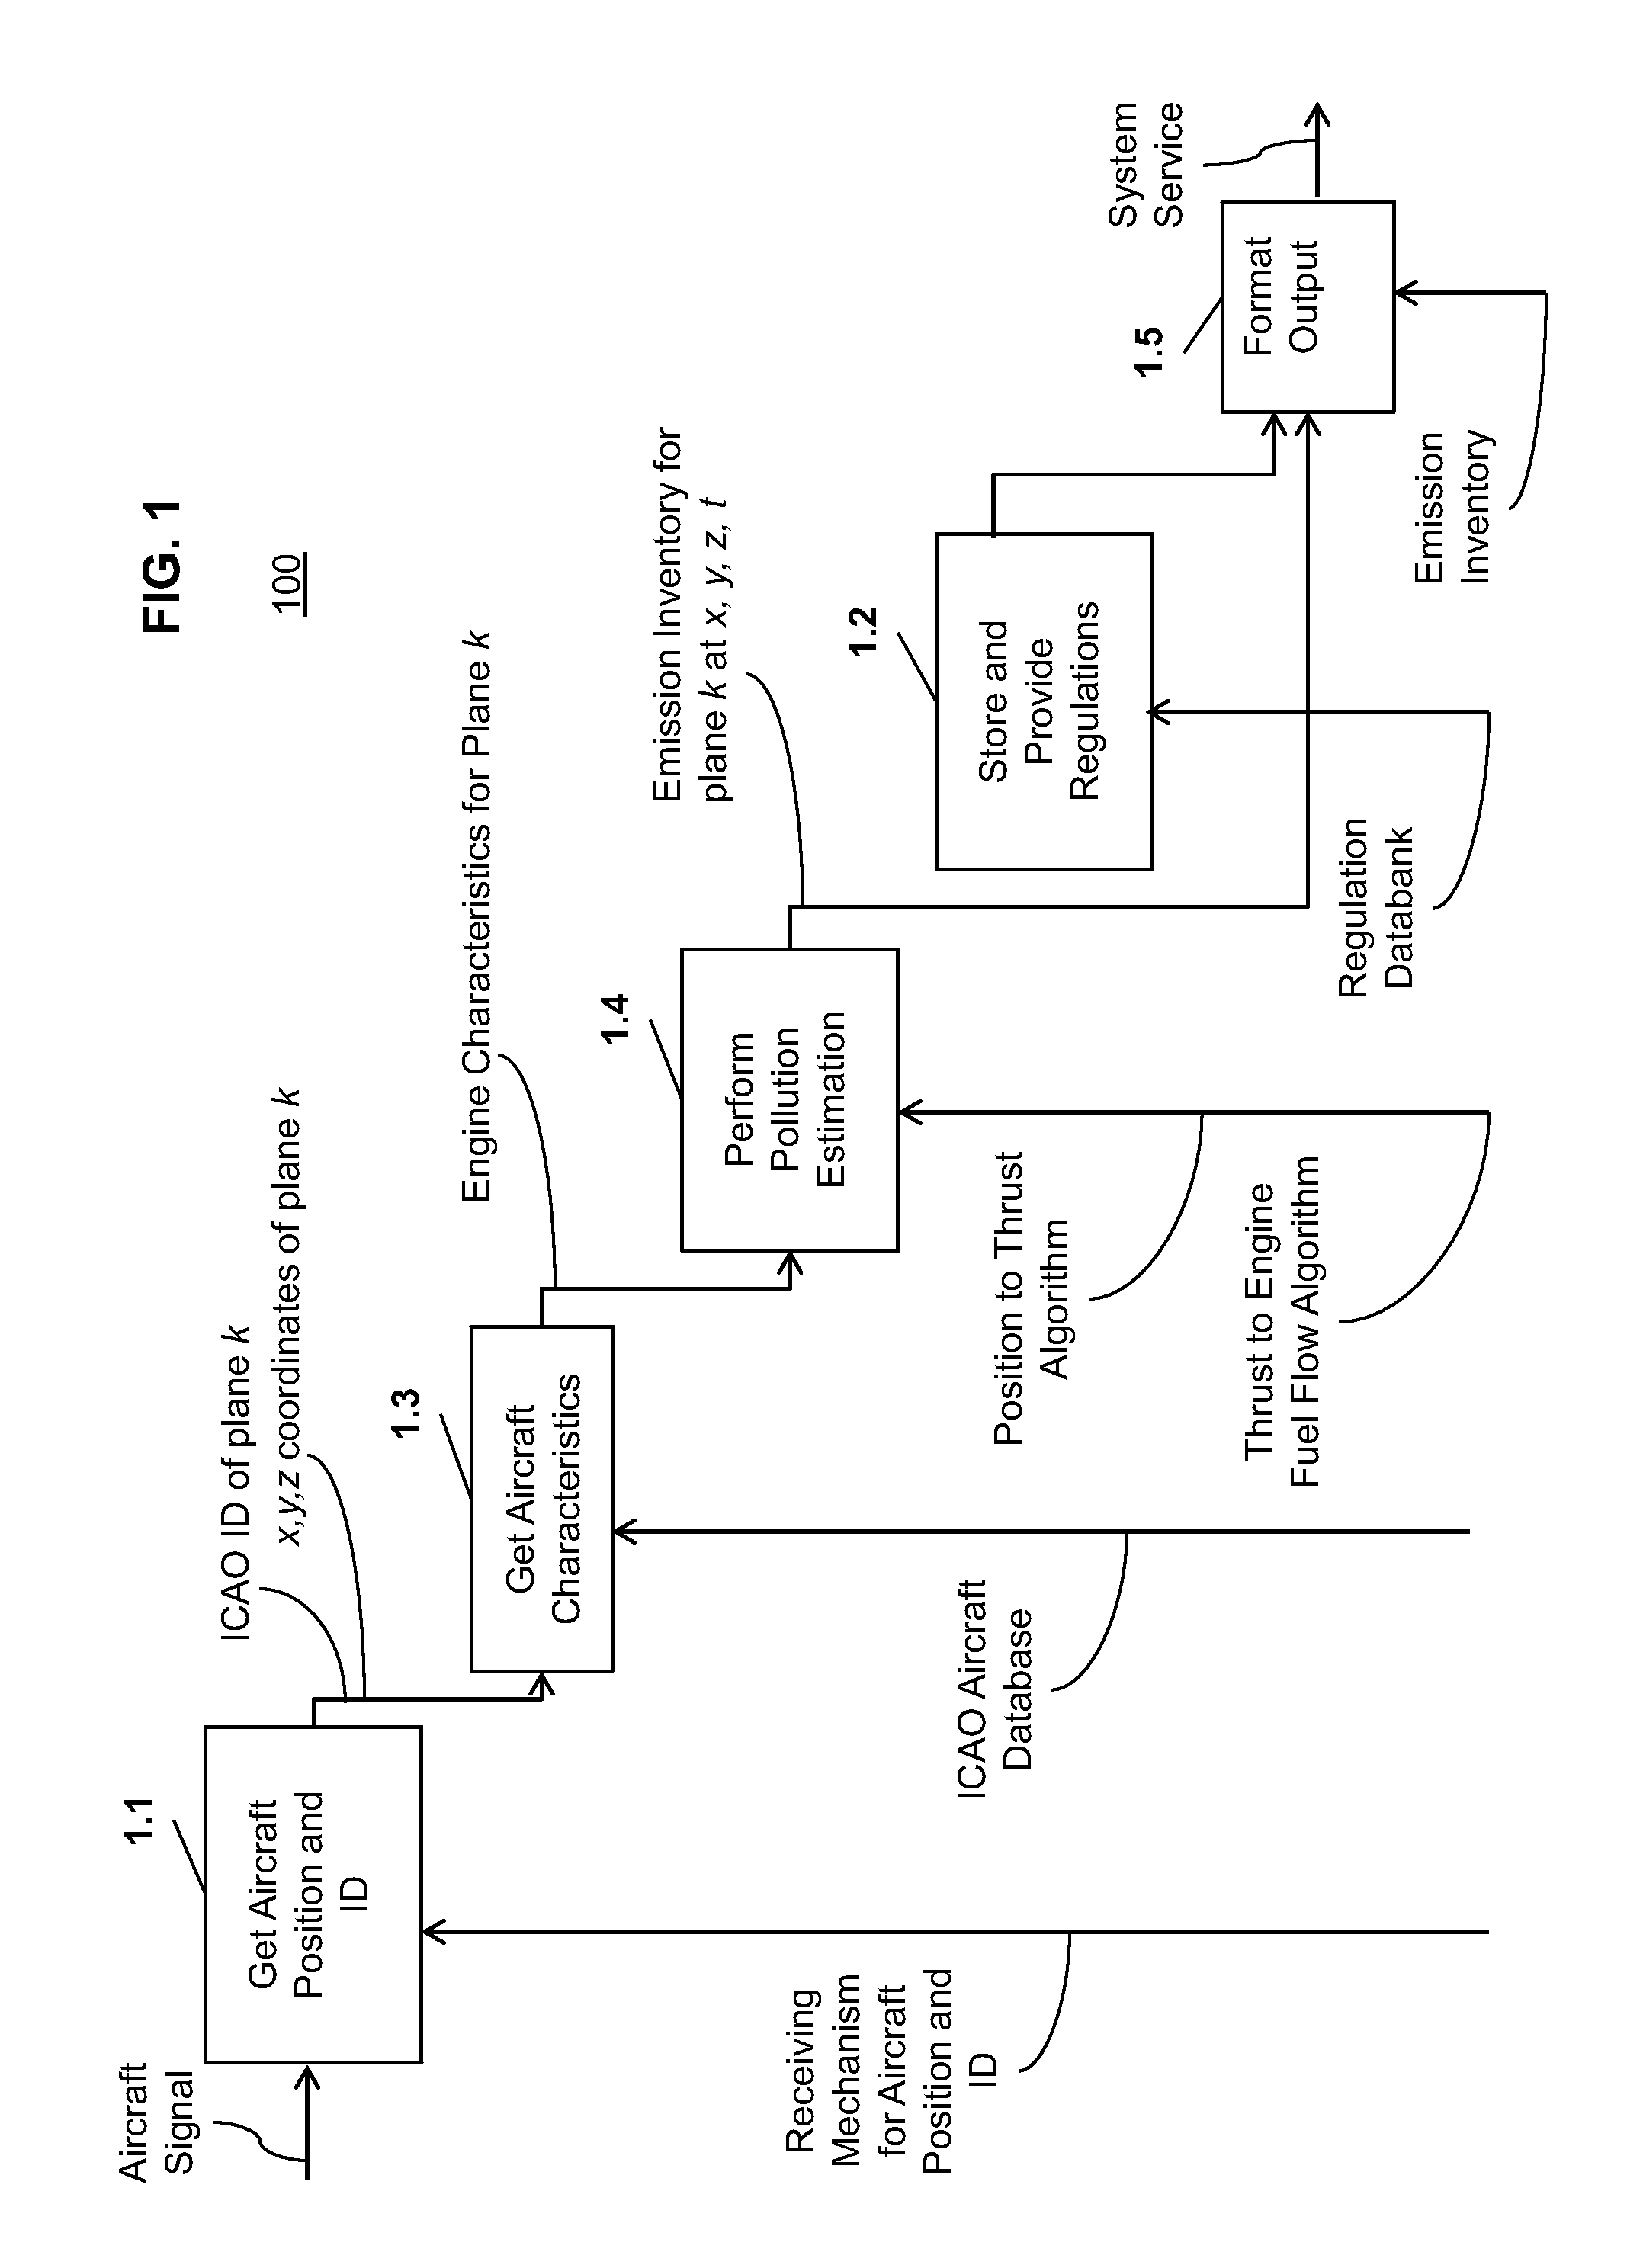 System and method for aircraft pollution accountability and compliance tracking